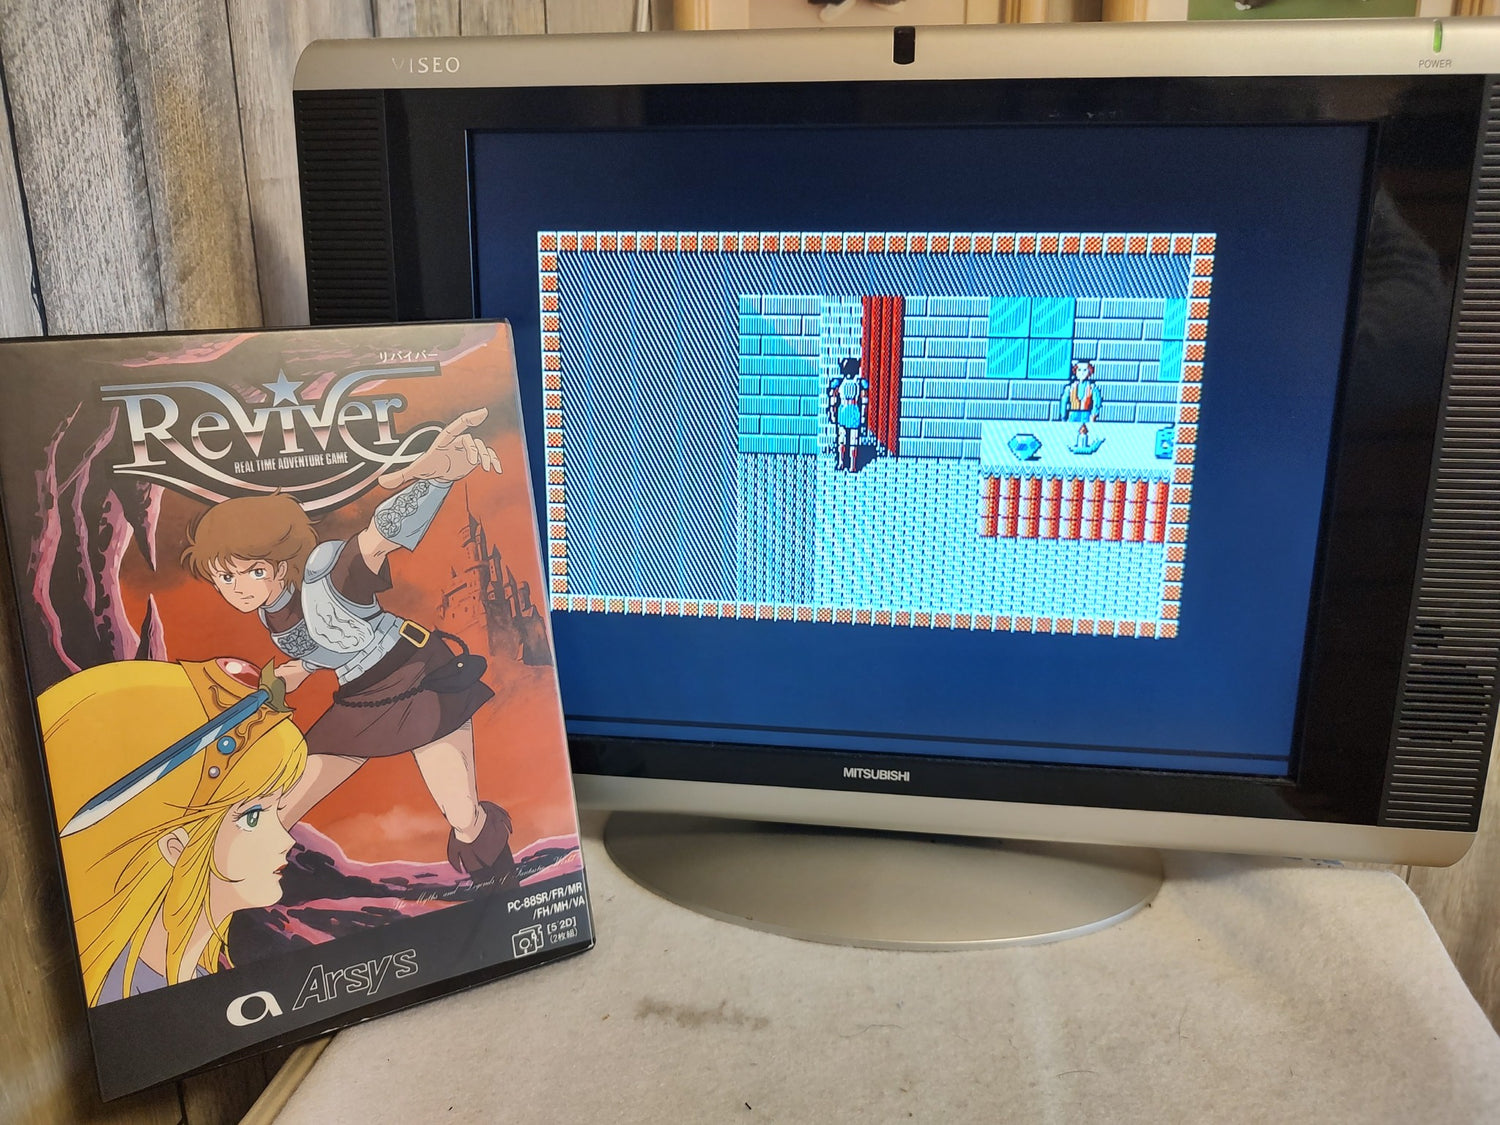 PC-8801 PC88 Reviver Game Disks, Manual, Box set, Working-f0107 